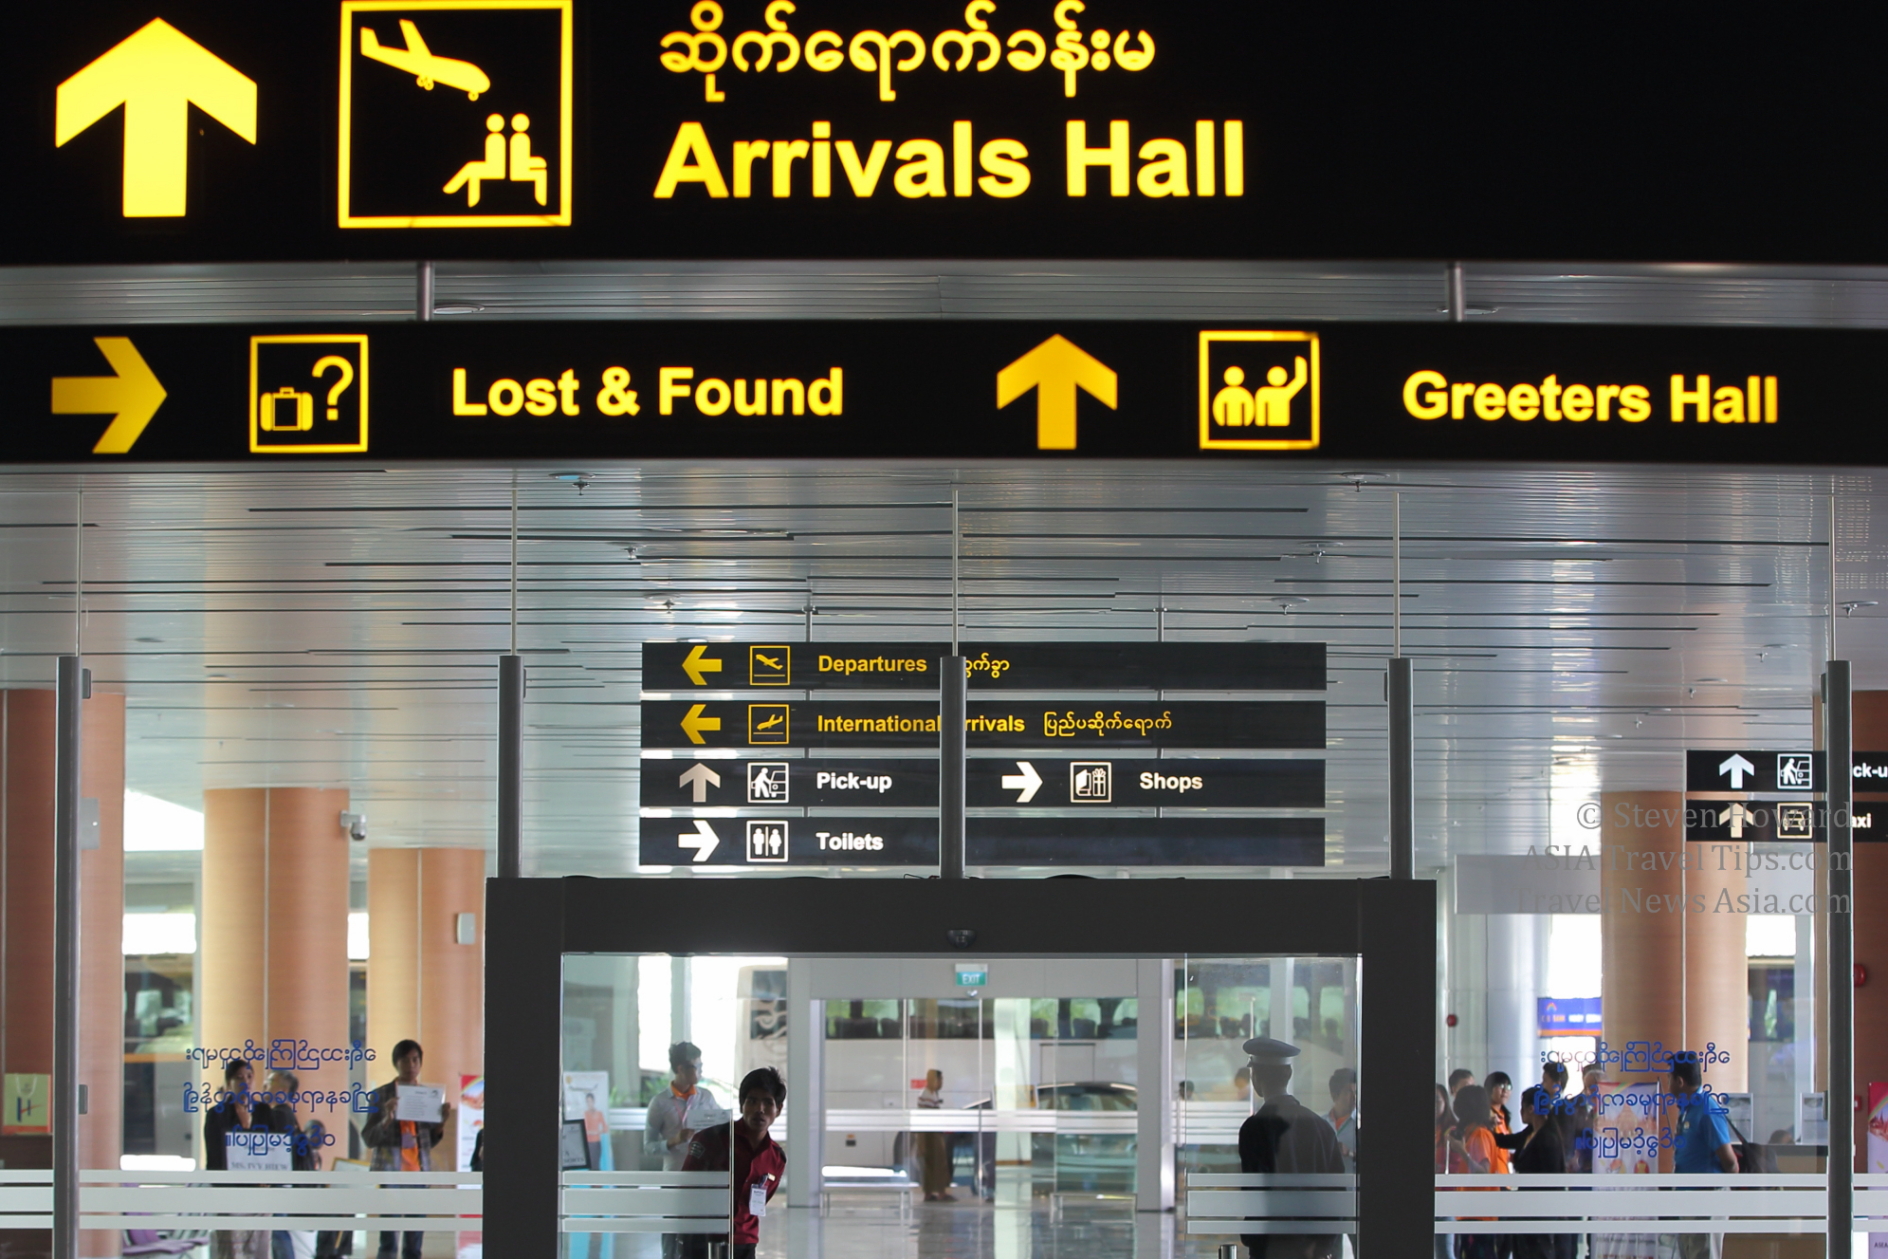 Arrivals Hall at Nay Pyi Taw Airport (NYT) in Myanmar. Picture by Steven Howard of TravelNewsAsia.com. Click to enlarge.